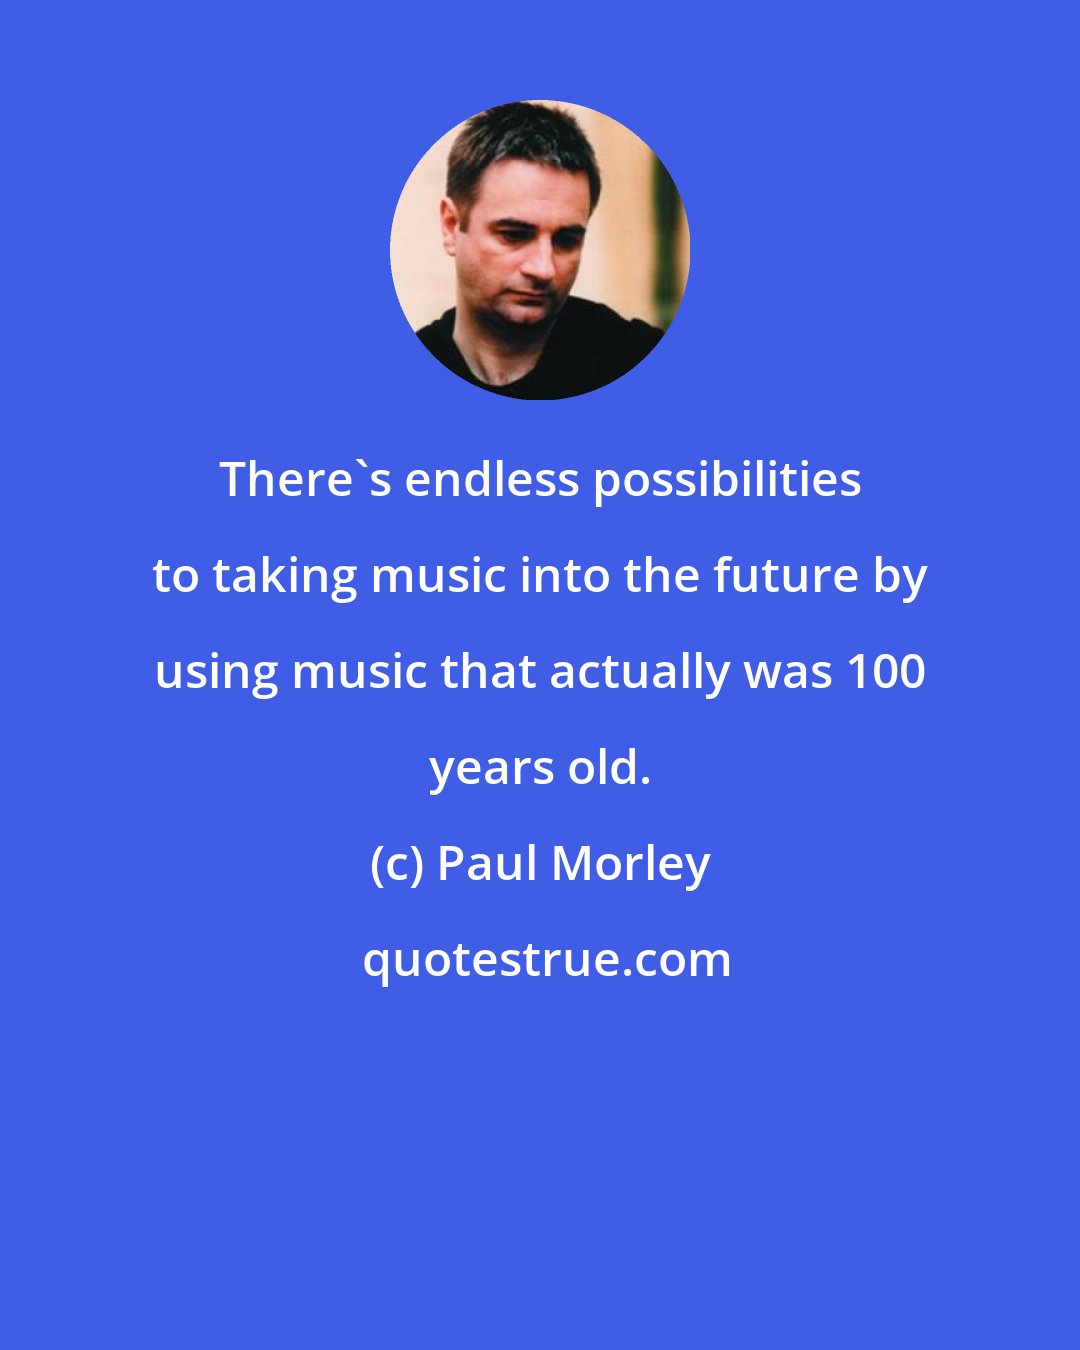 Paul Morley: There's endless possibilities to taking music into the future by using music that actually was 100 years old.